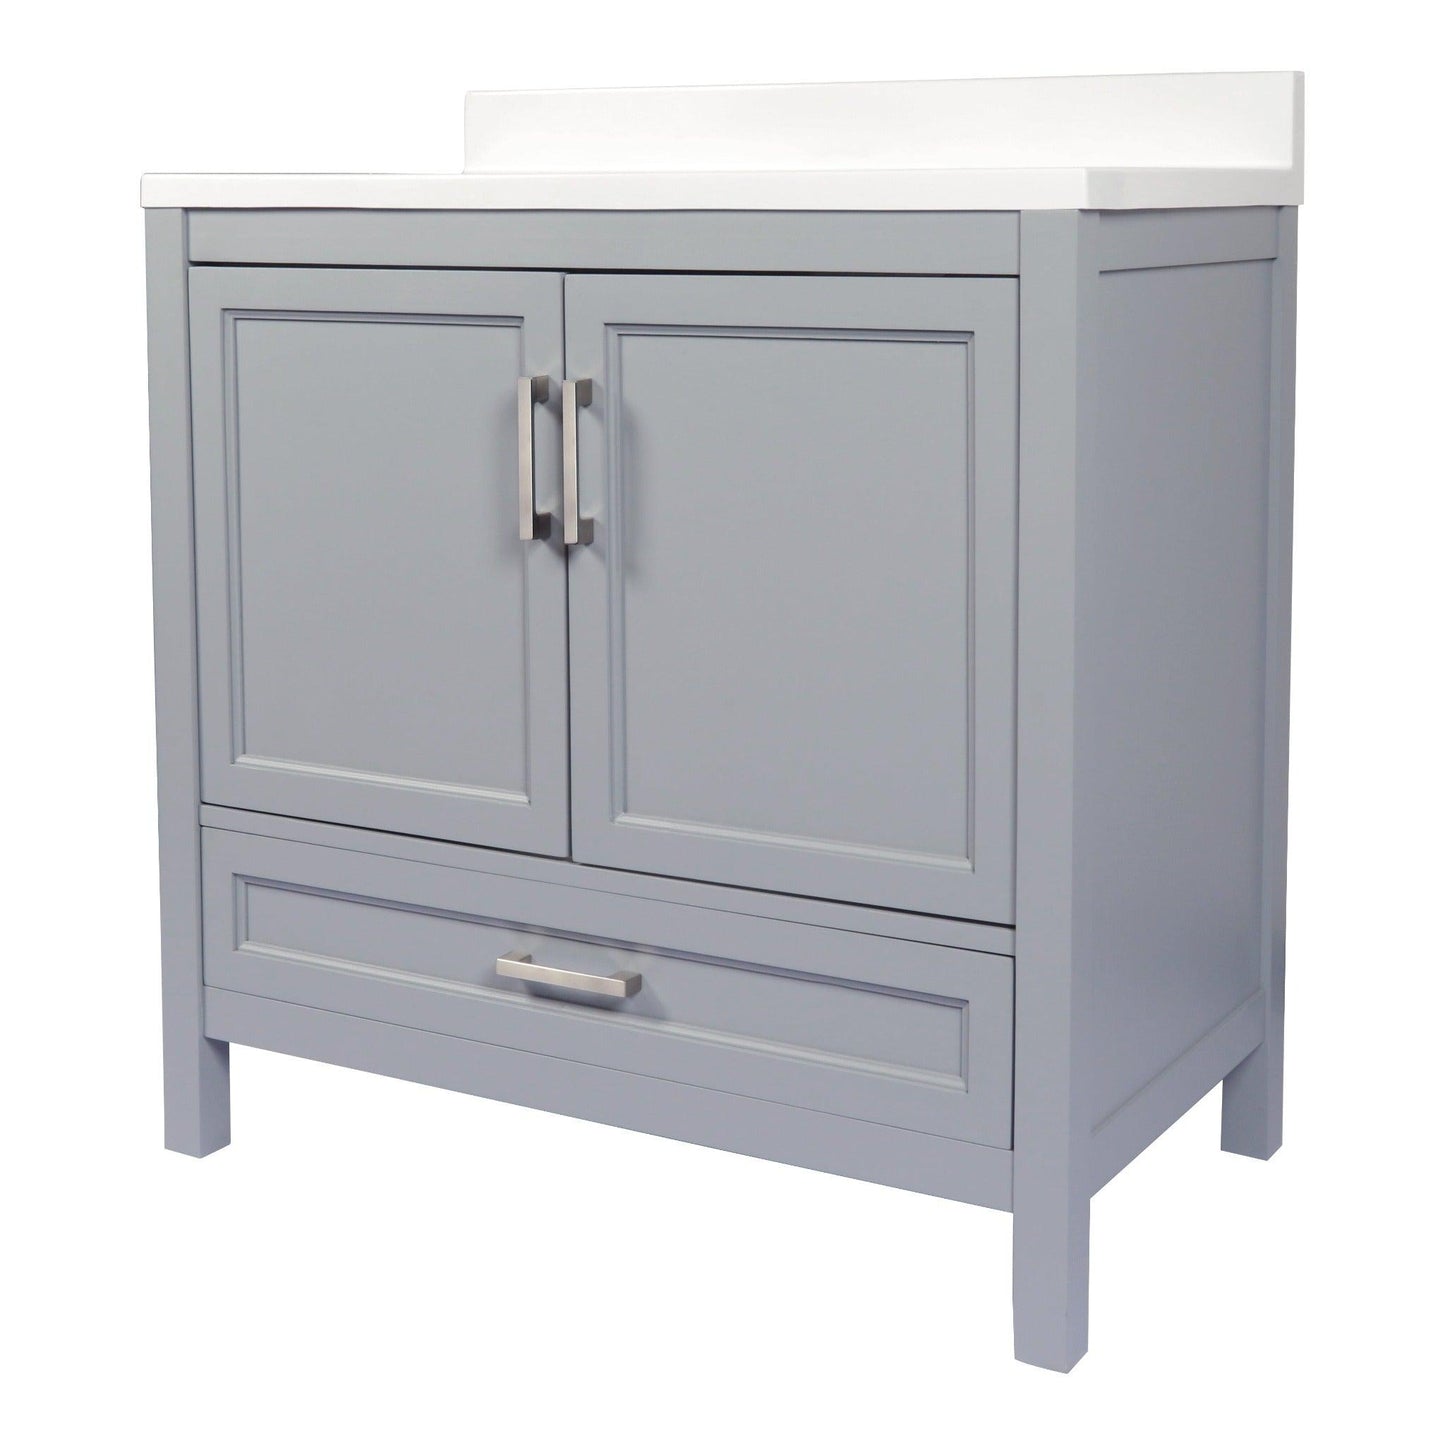 Ella’s Bubbles Nevado 37" Gray Bathroom Vanity With White Cultured Marble Top With White Backsplash and Sink